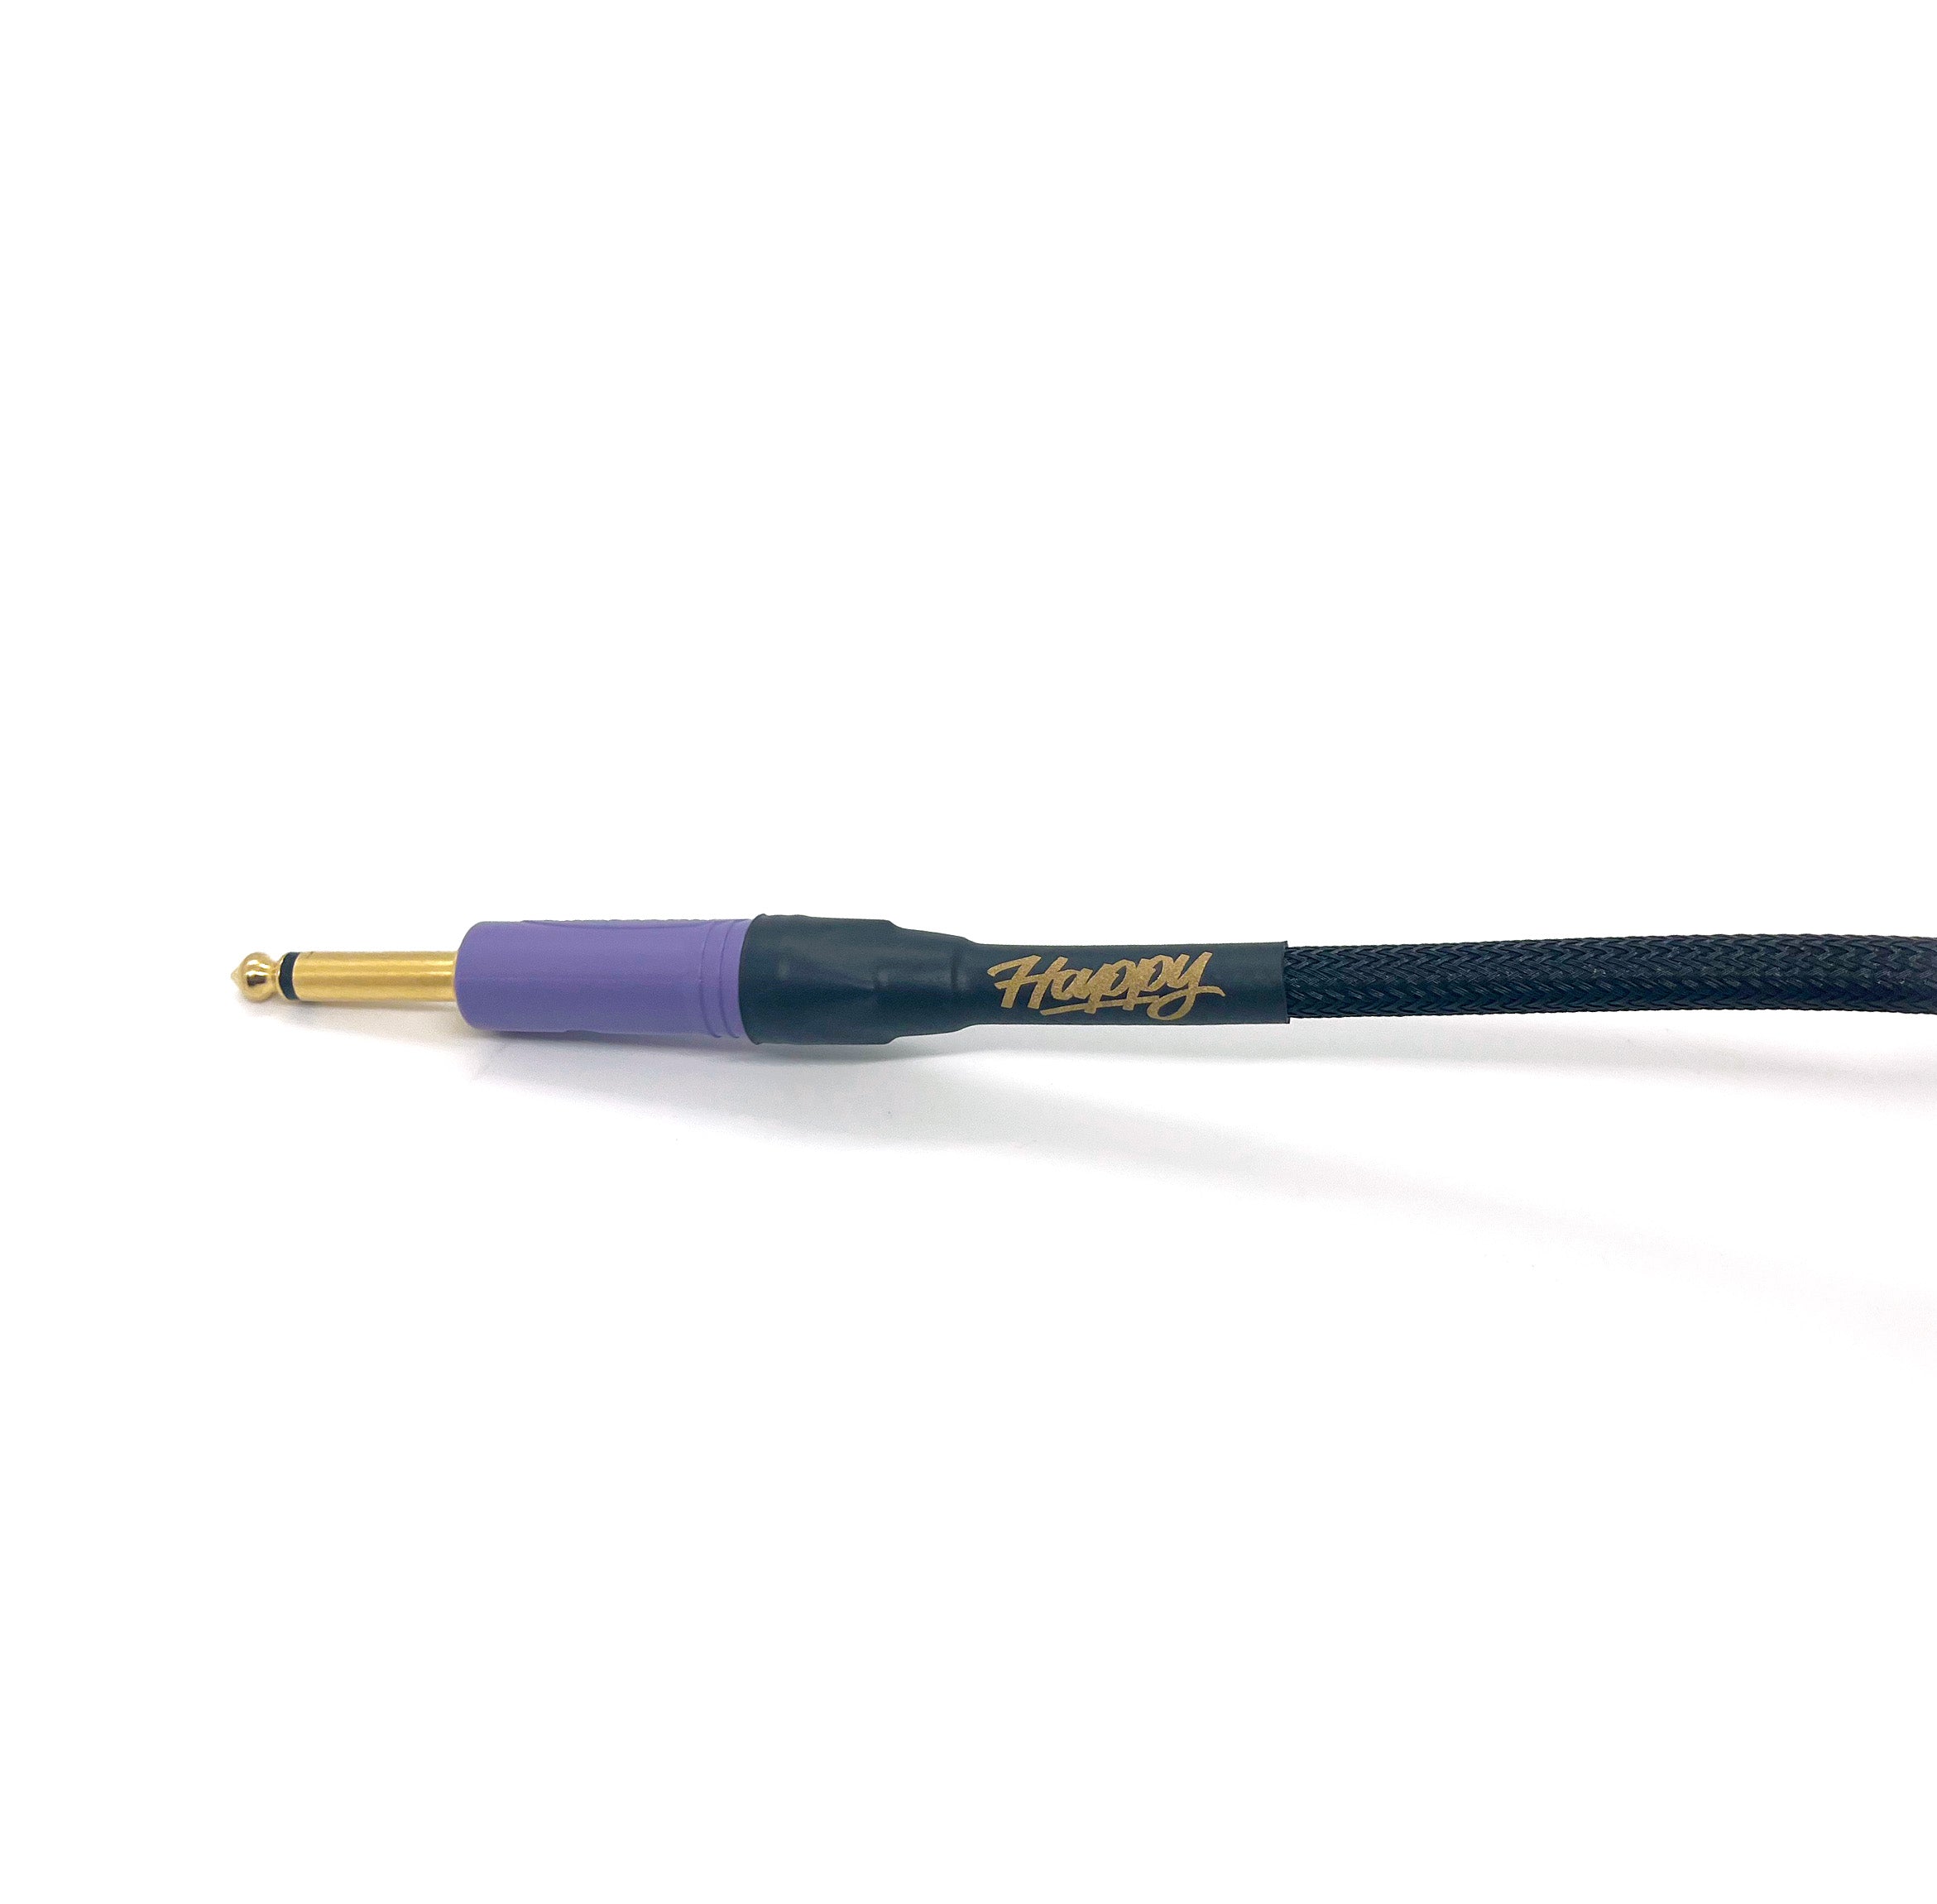 The Ceramic Colorshield Instrument Cable - Stealth Black w/ Lilac